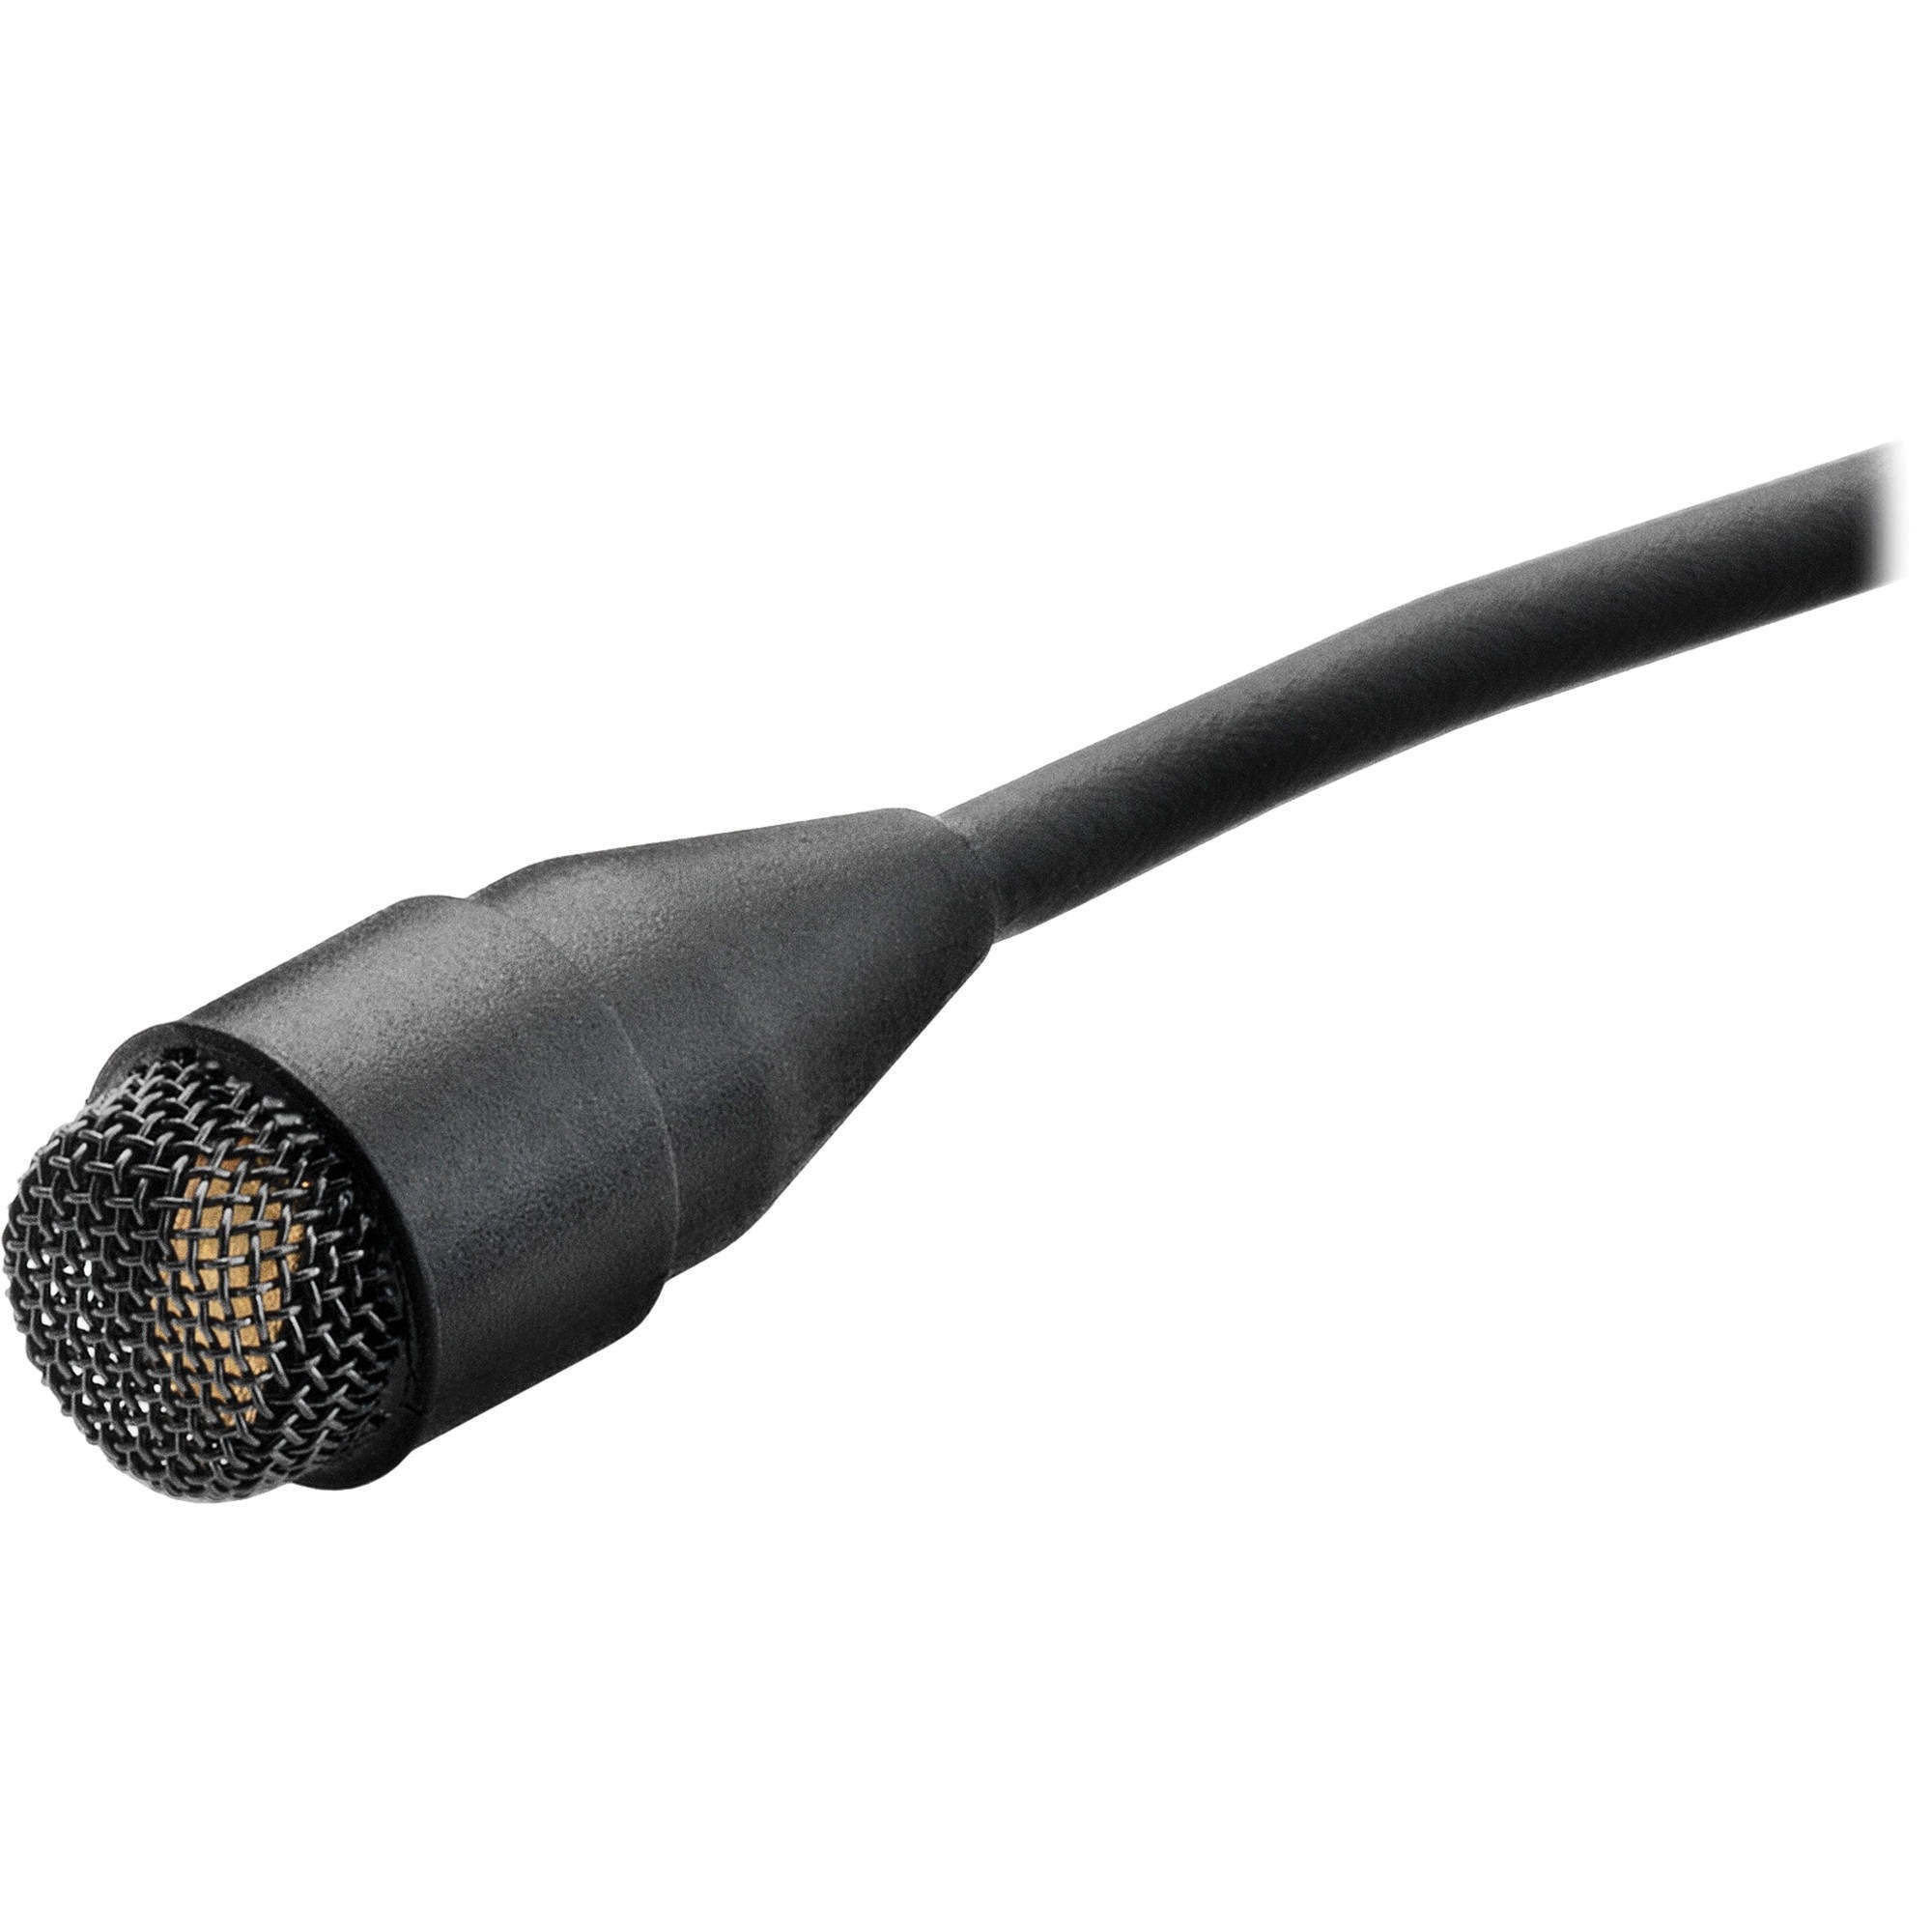 DPA Microphones d:screet Core 4061 Omnidirectional Microphone with MicroDot Connector (Black)